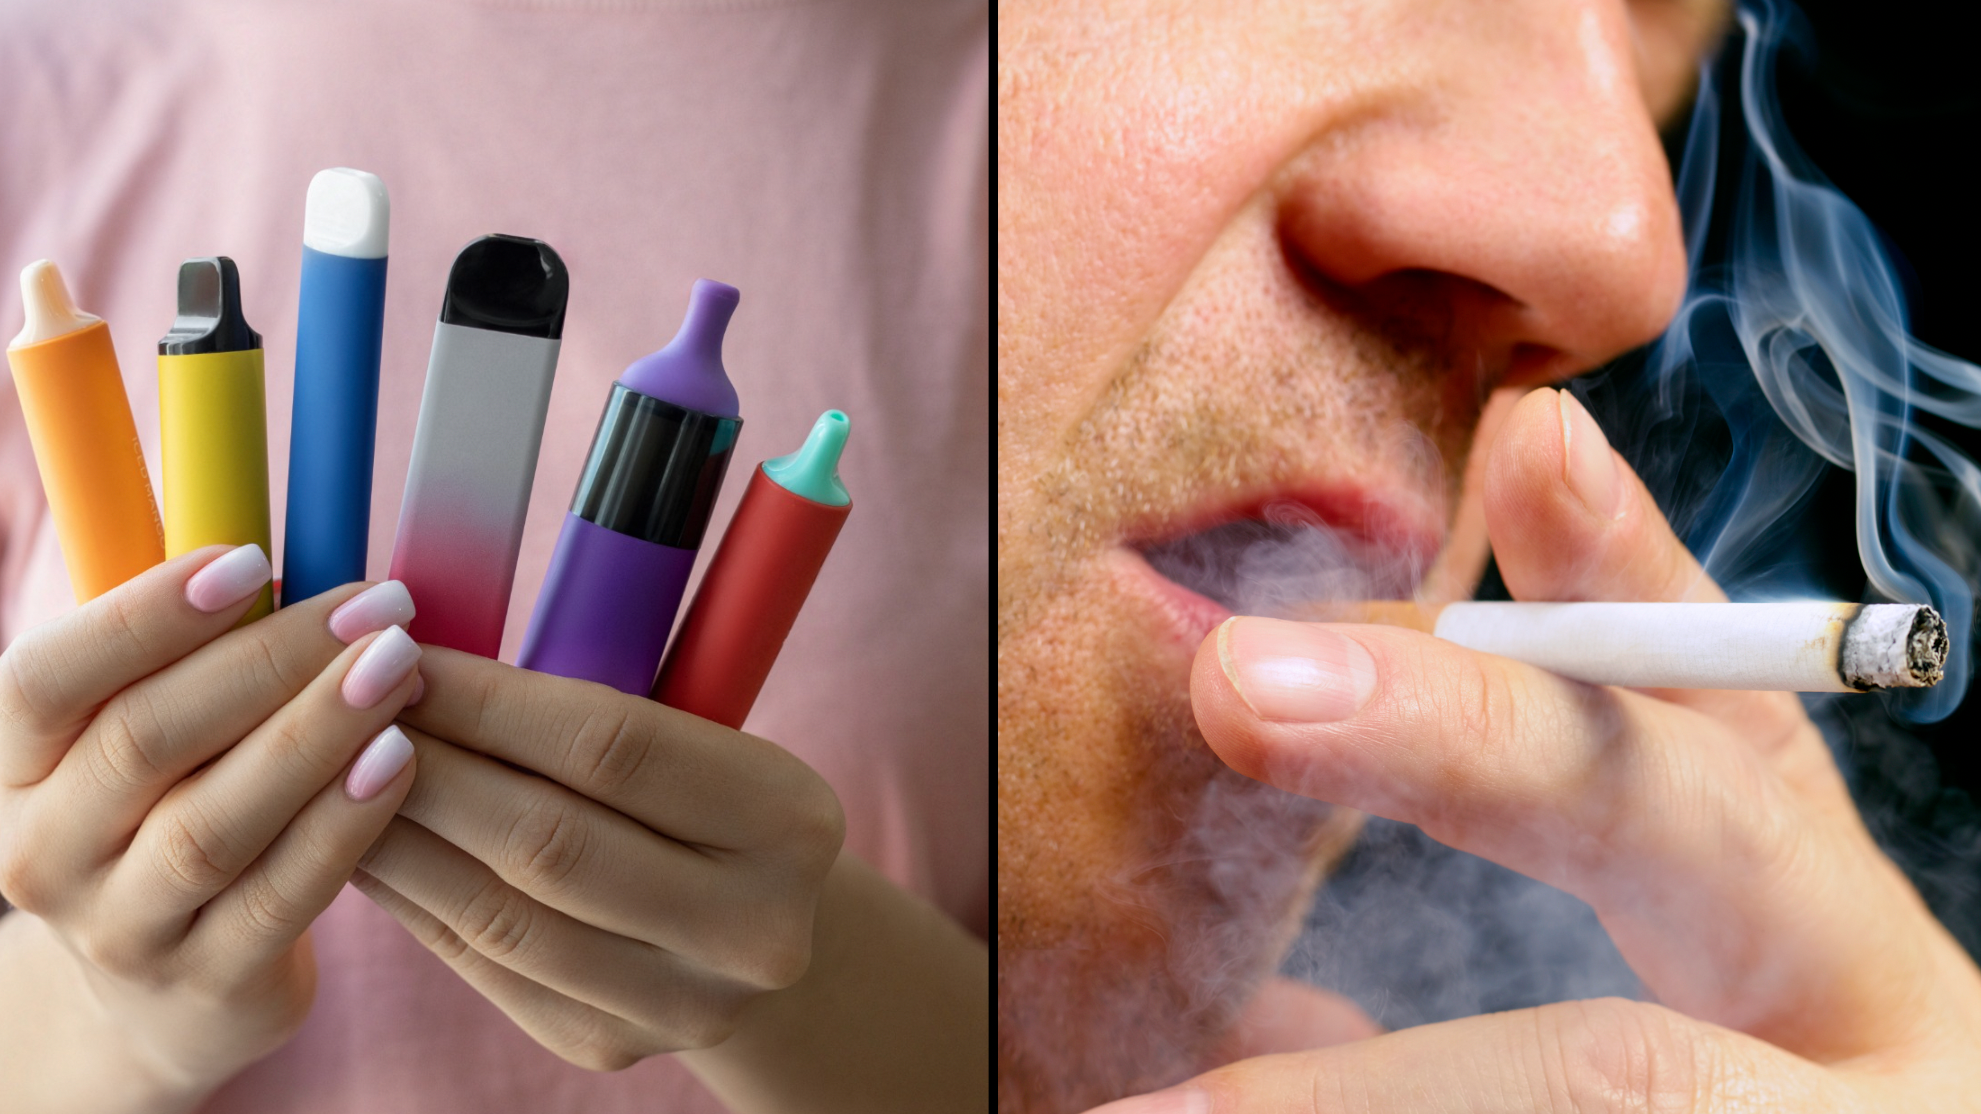 NHS reveals how many cigarettes one disposable vape is equivalent to